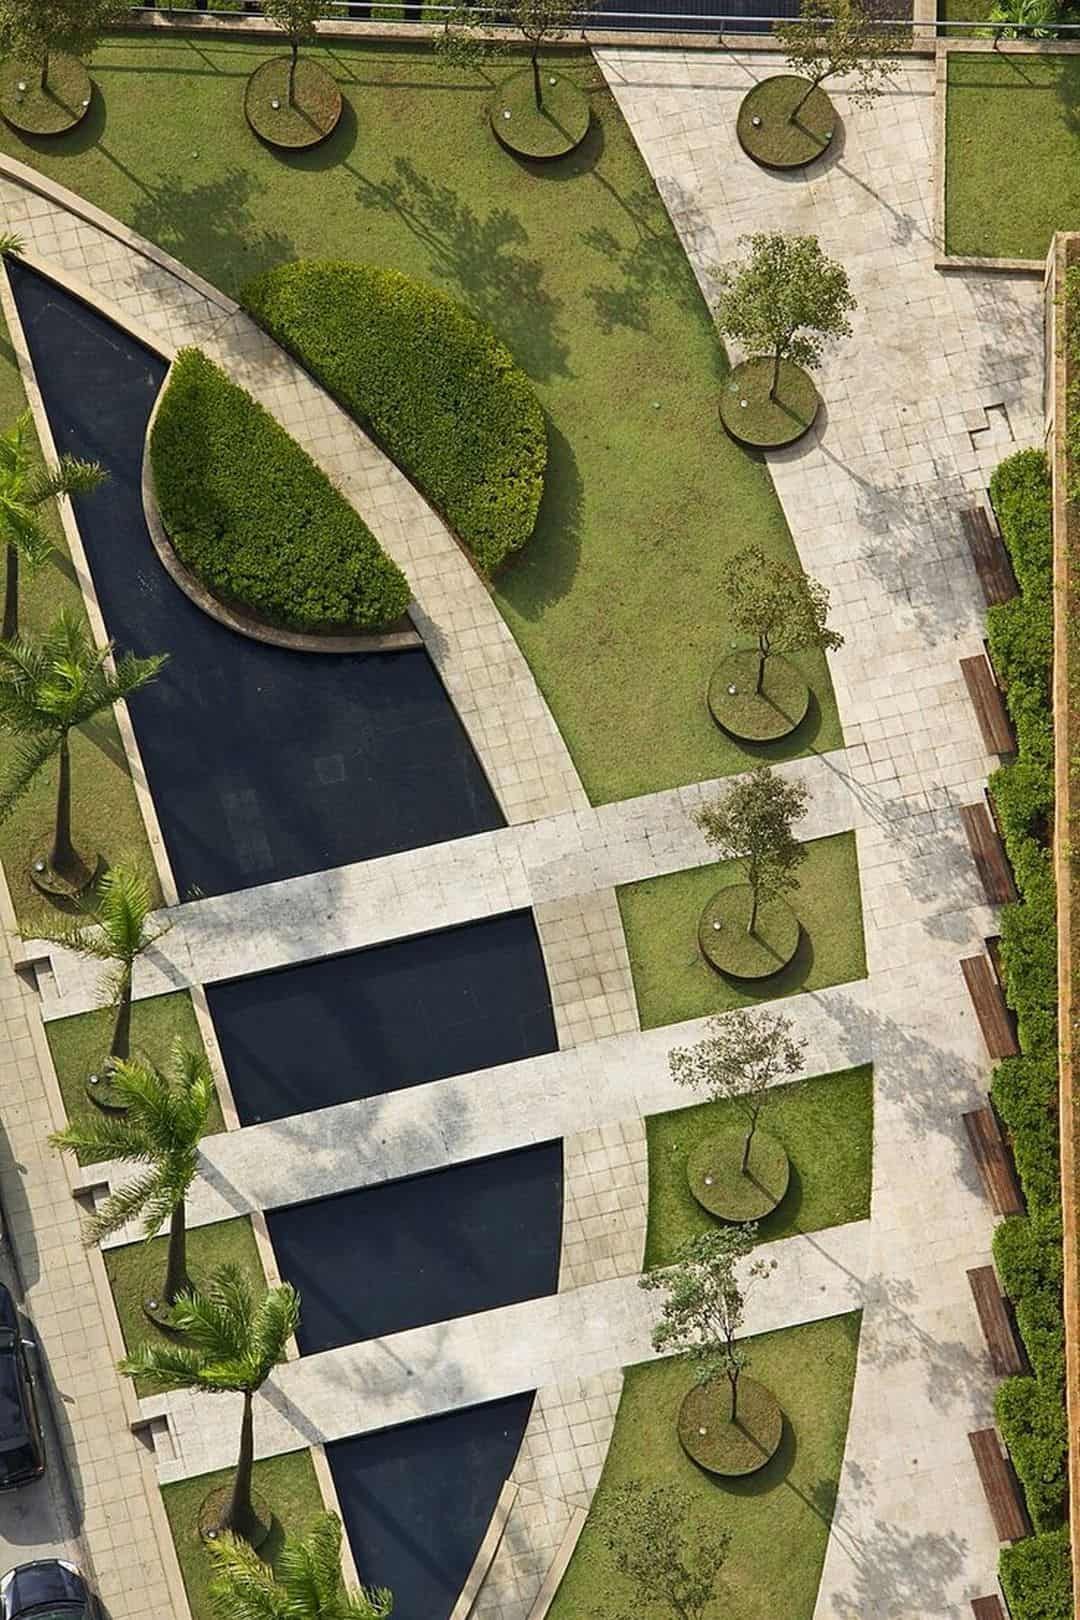 Paradiso: A Suburban Paradise with Vast Landscaped Lawns and Innovative Structural Design | Futurist Architecture -   14 garden design Landscape architecture ideas